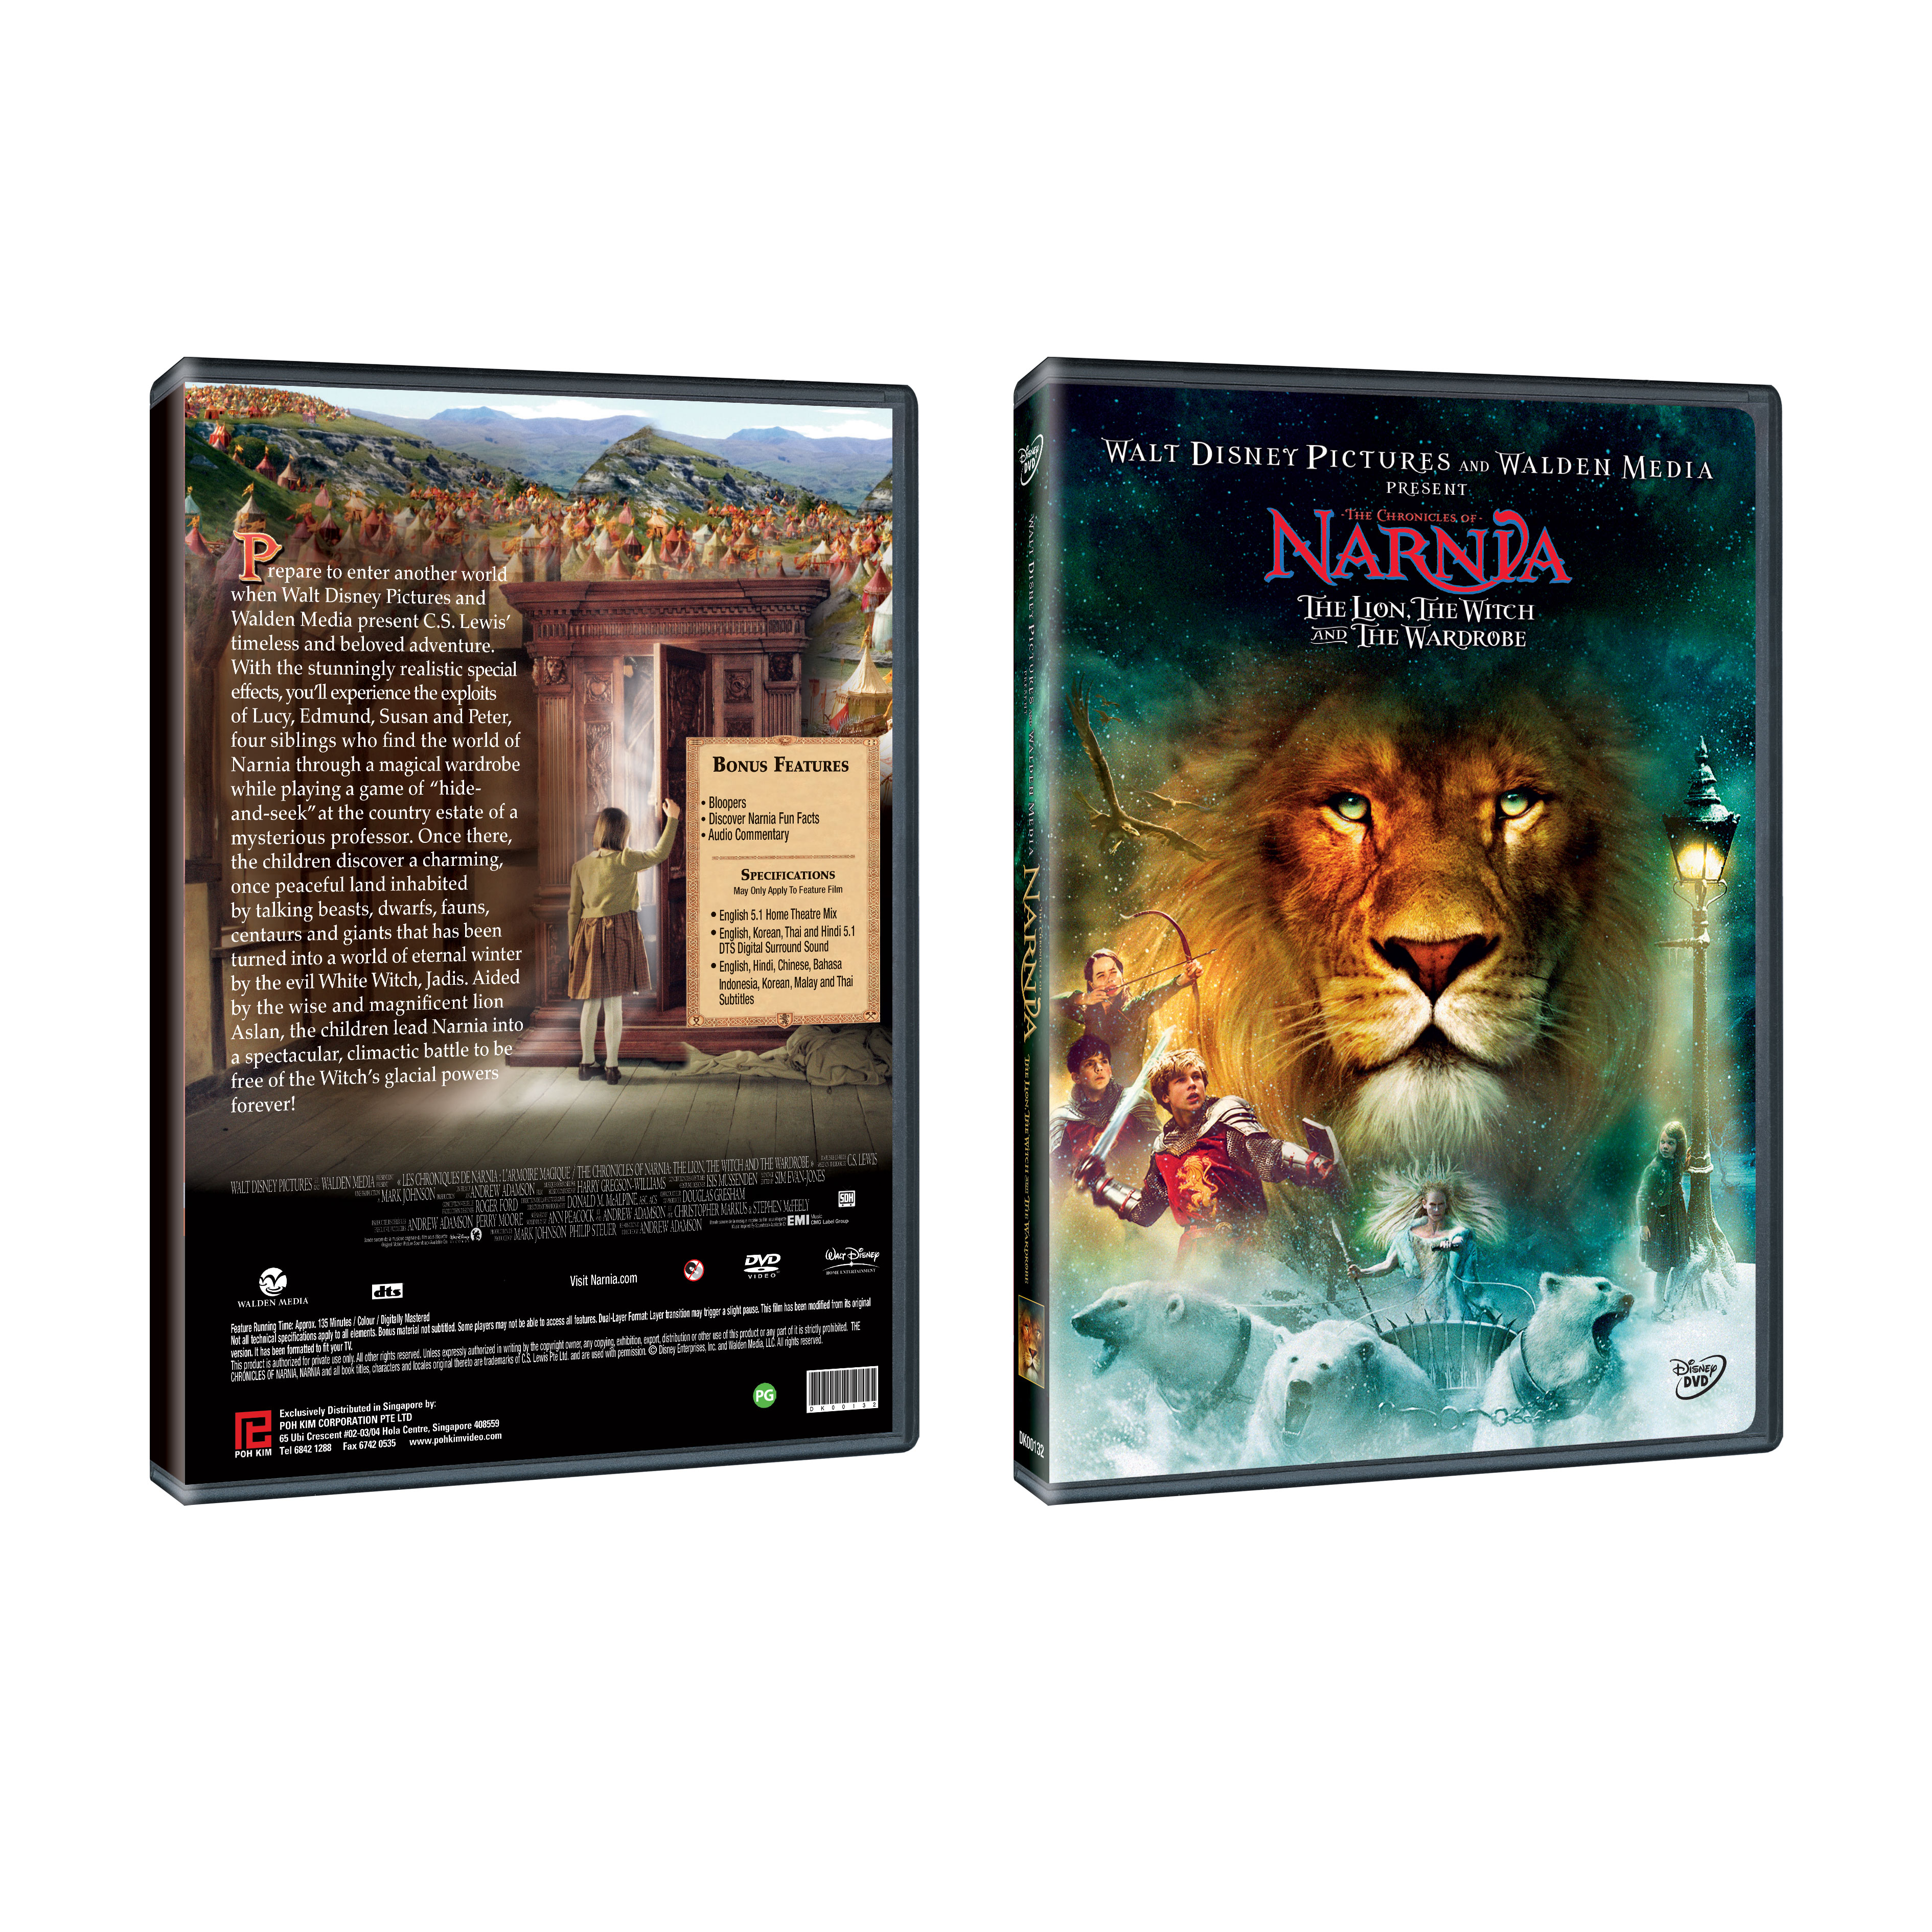 DVD REVIEW: CHRONICLES OF NARNIA, THE – TLTWATW (SE)